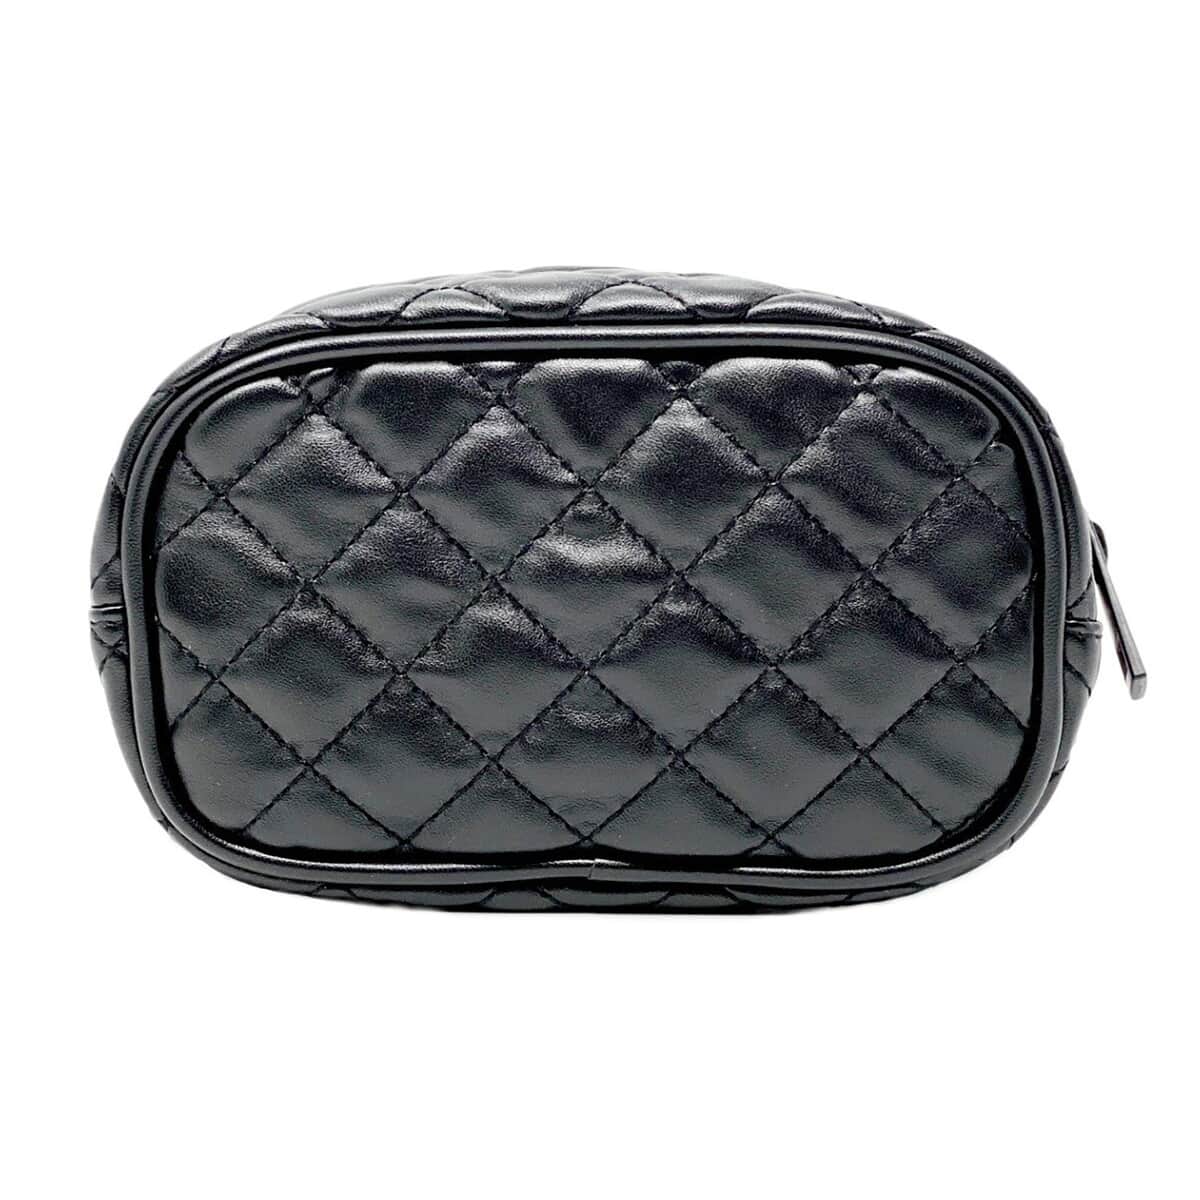 Black Quilted Pattern Vegan Leather Cosmetic Bag (6.25"x3"x4") image number 0